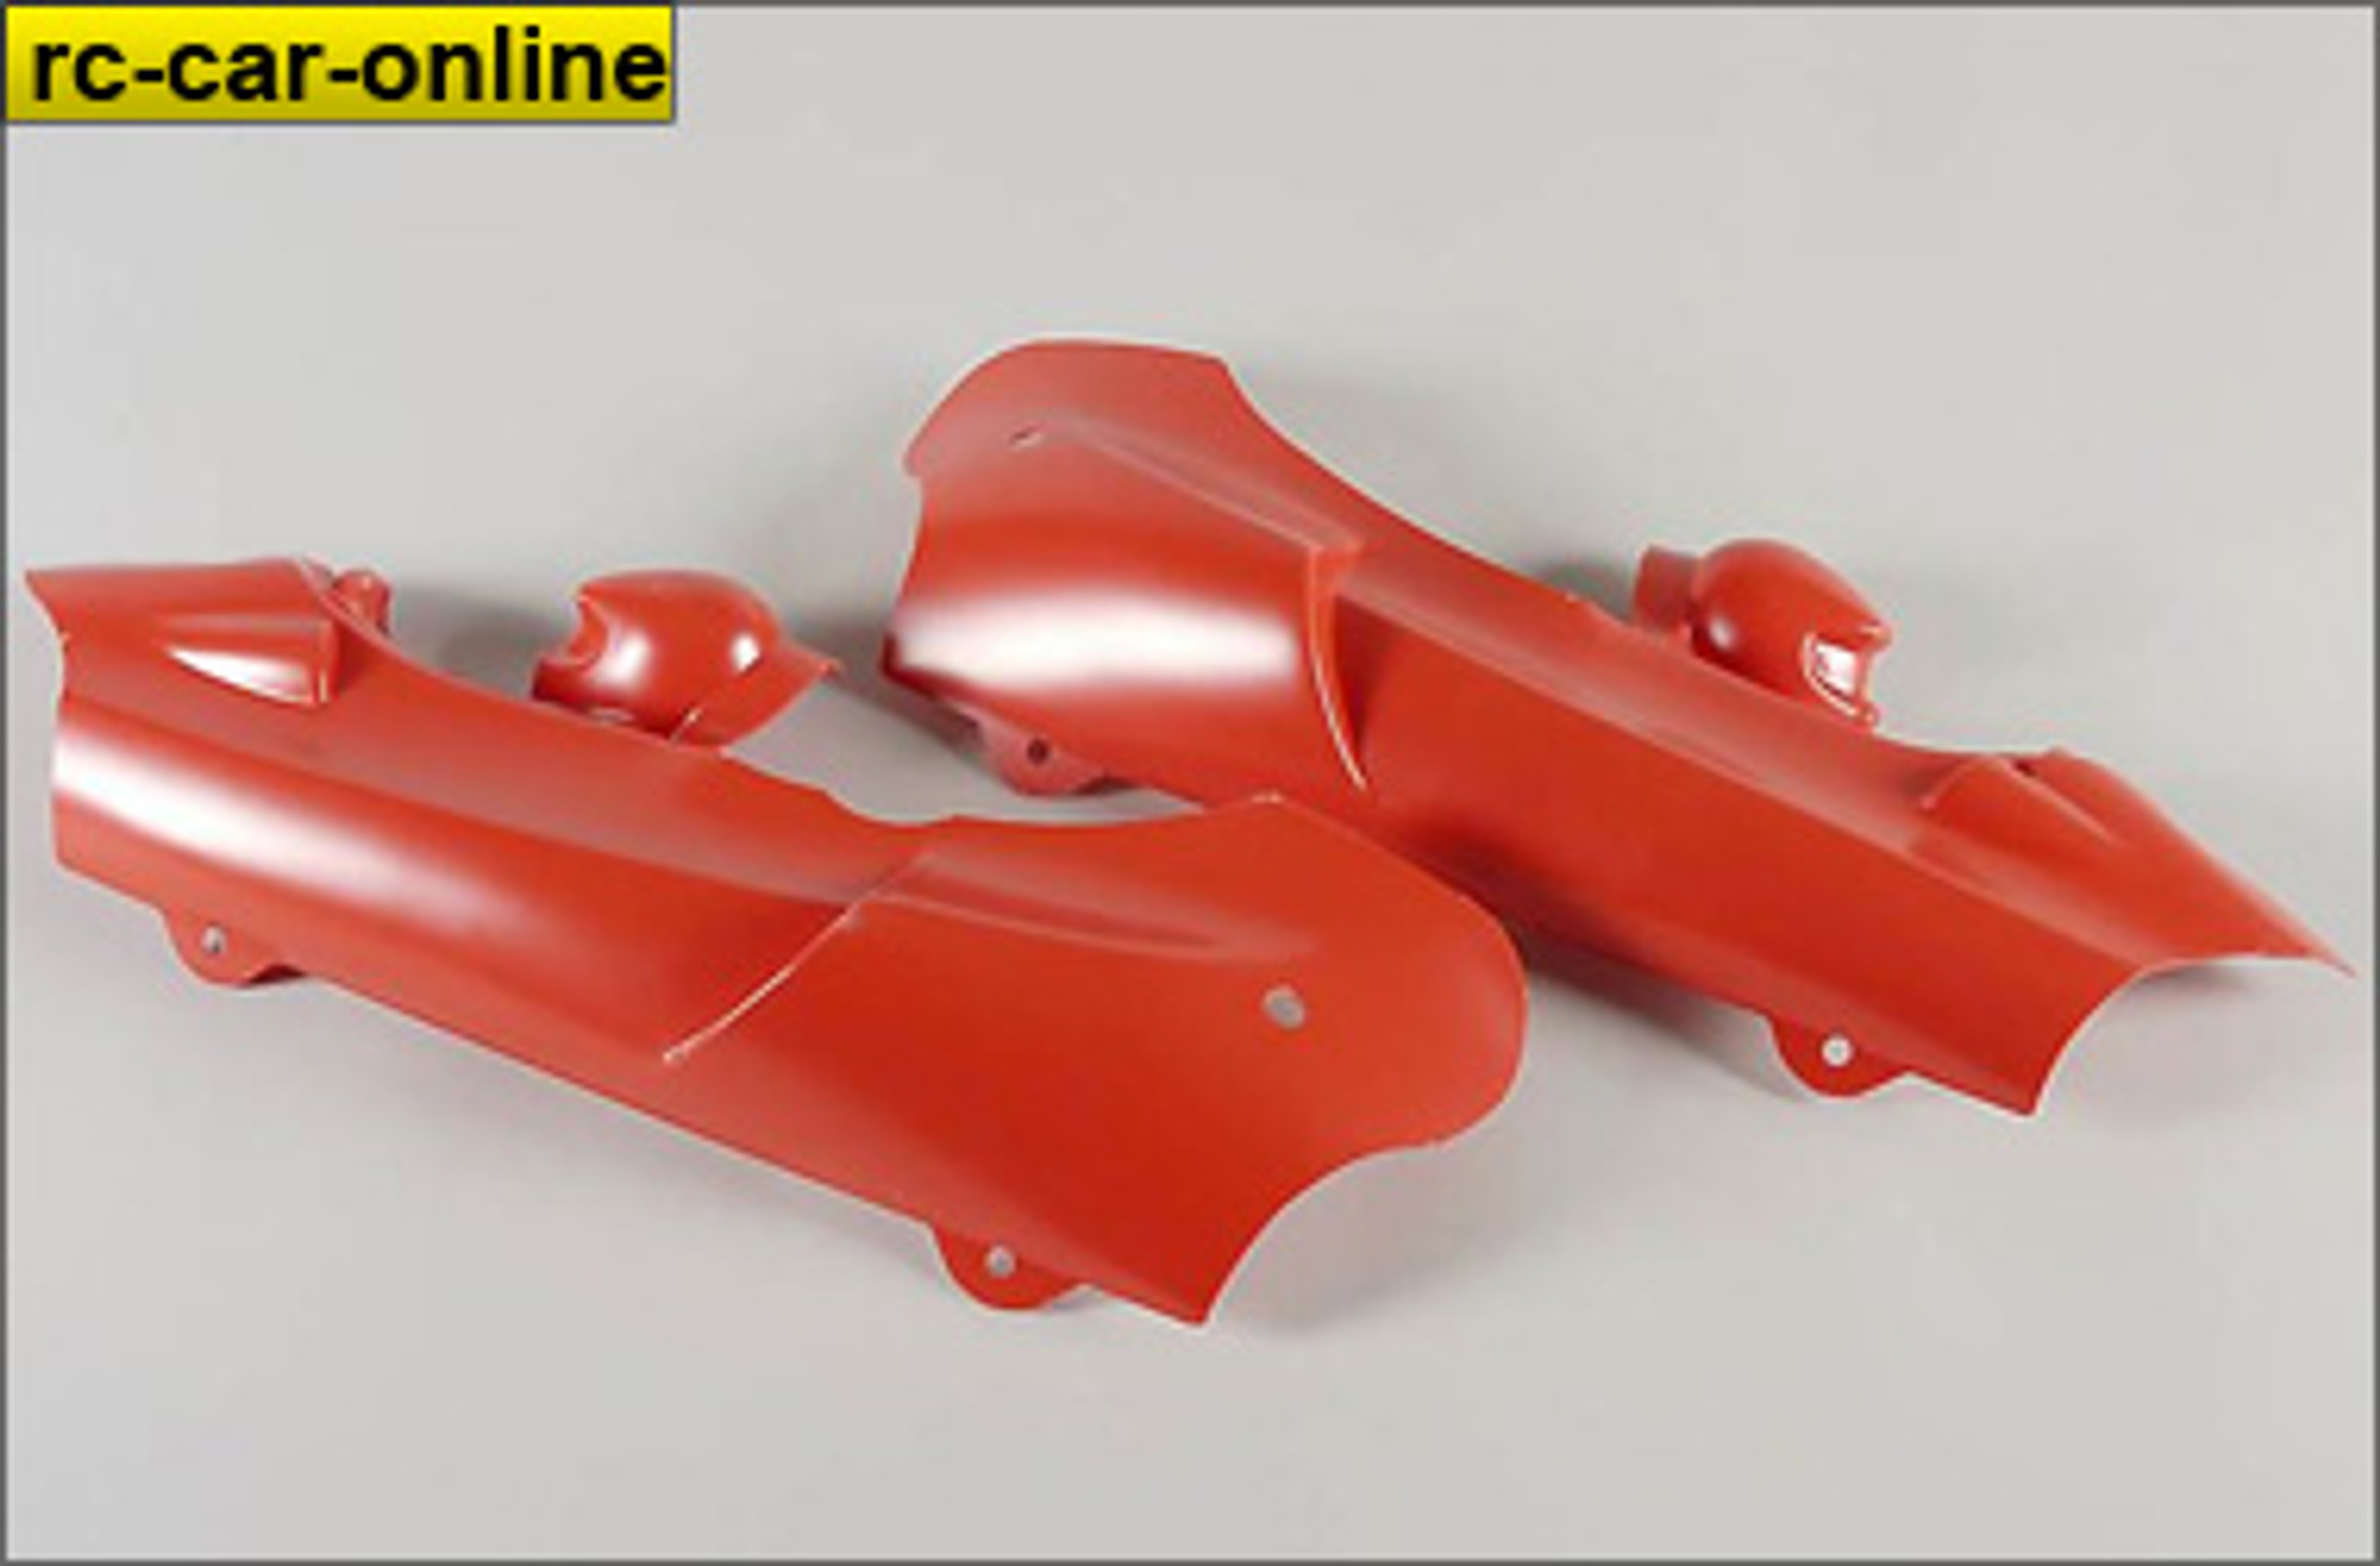 60120/01 FG Body shell Off-Road Buggy red for 2WD - 1 pcs.